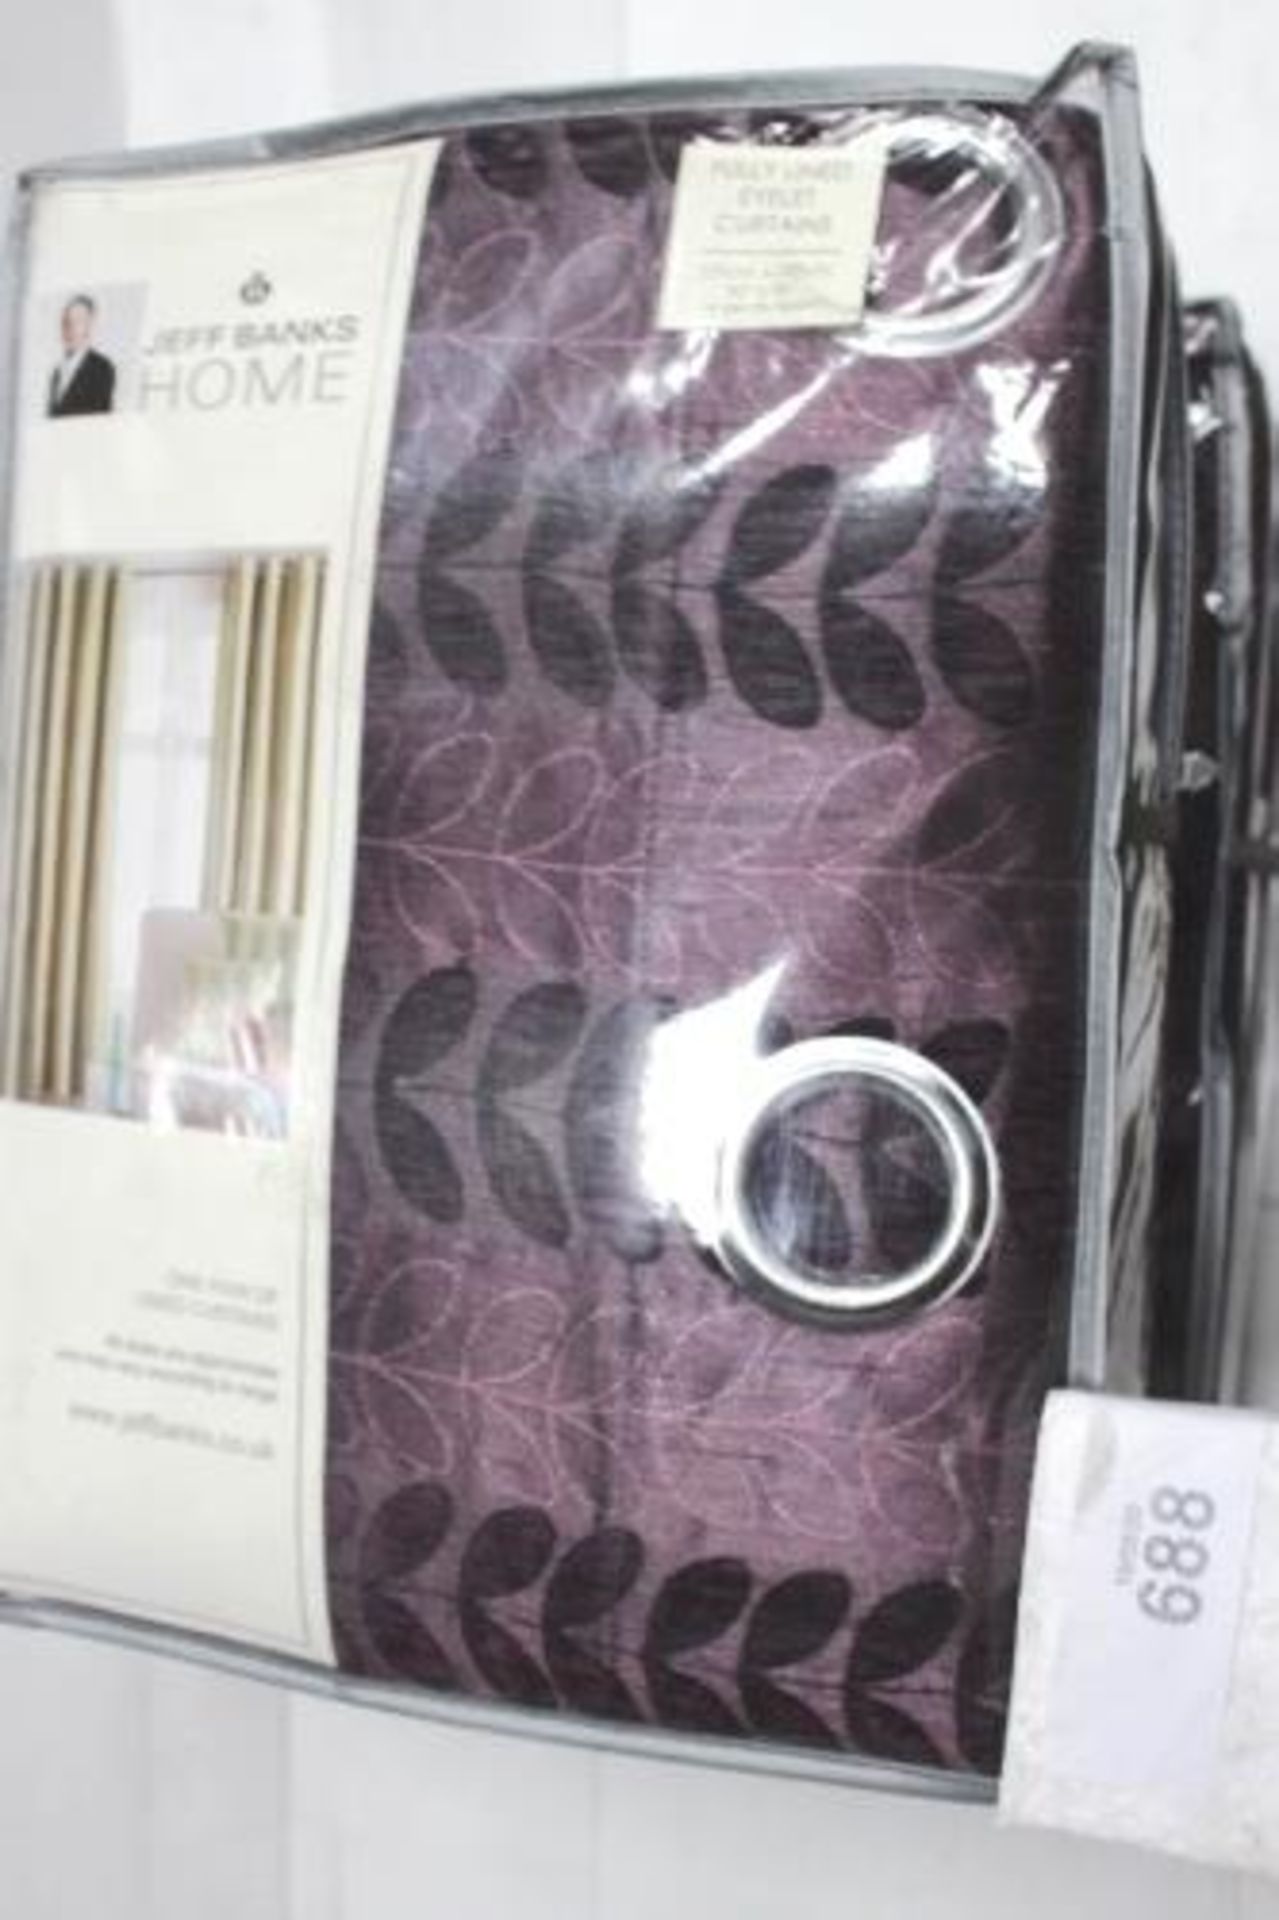 4 x Jeff Banks Home Alison Sierra RMC aubergine fully lined curtains, size 229 x 229cm - New in